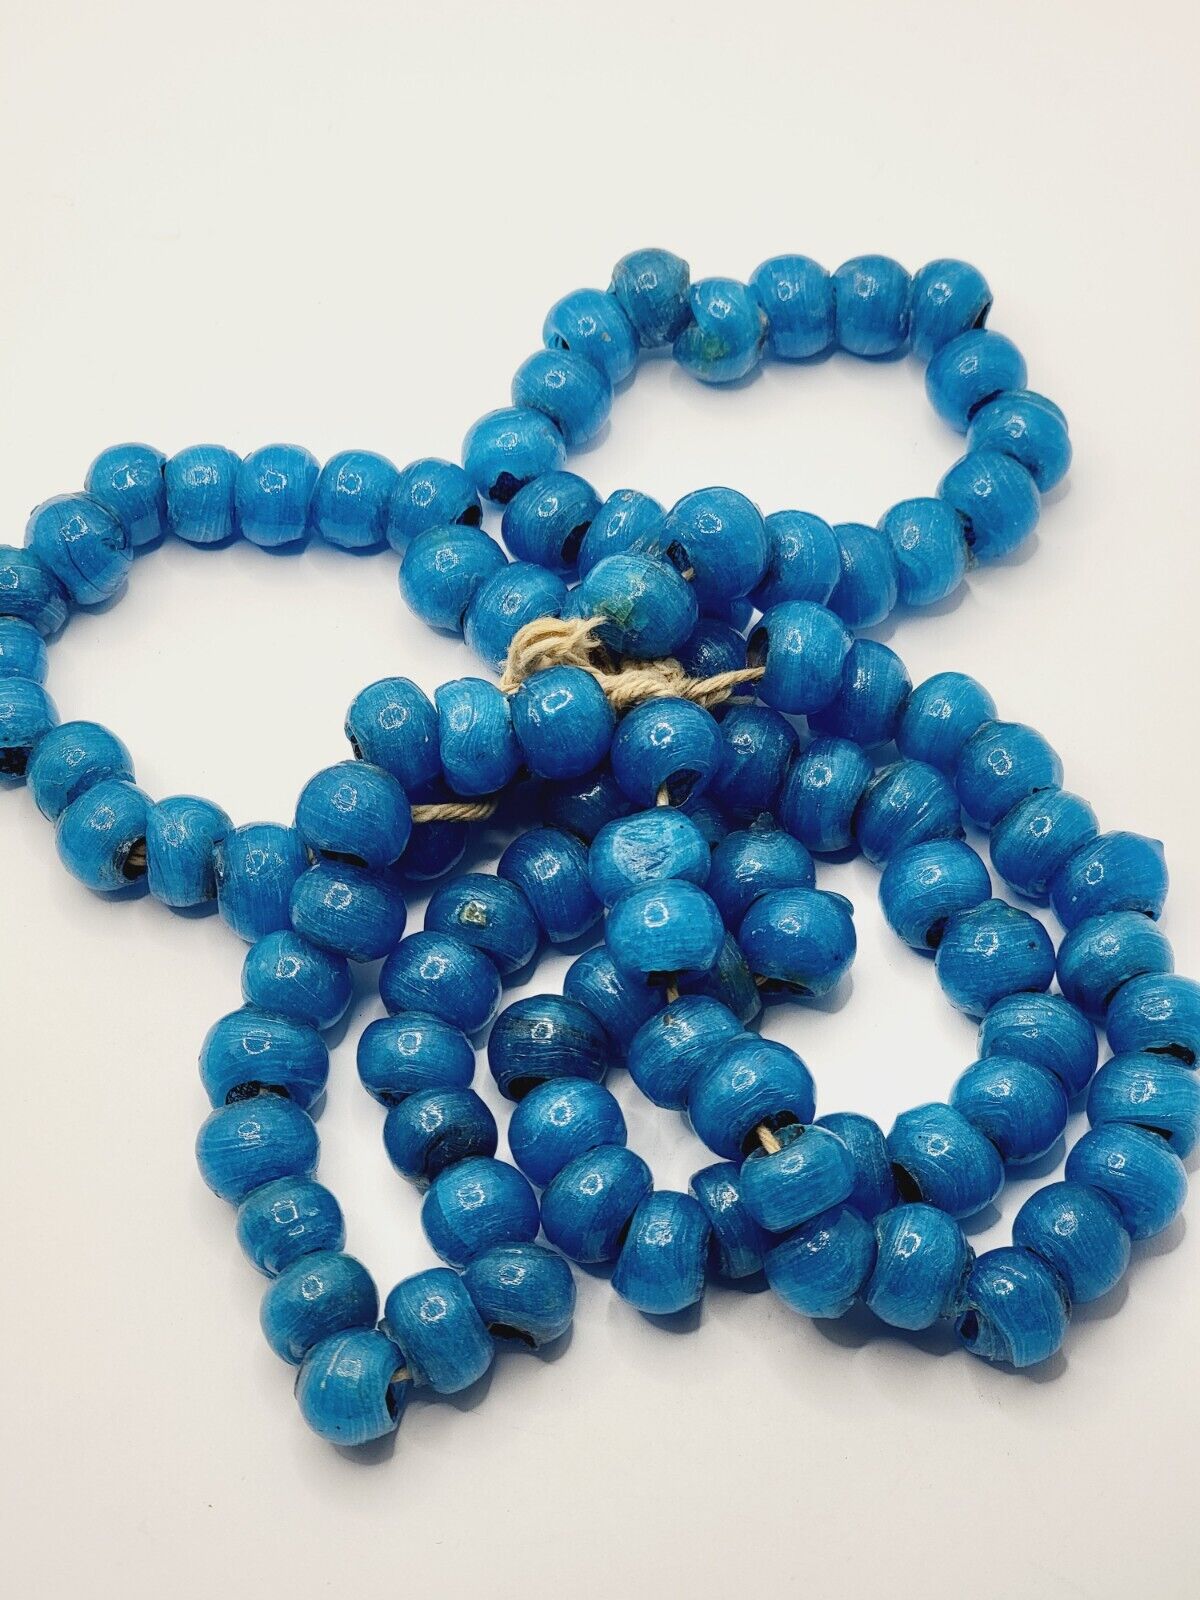 Vintage Rare Old African Trading Beads Trading Beads Transparent Candy Blue 